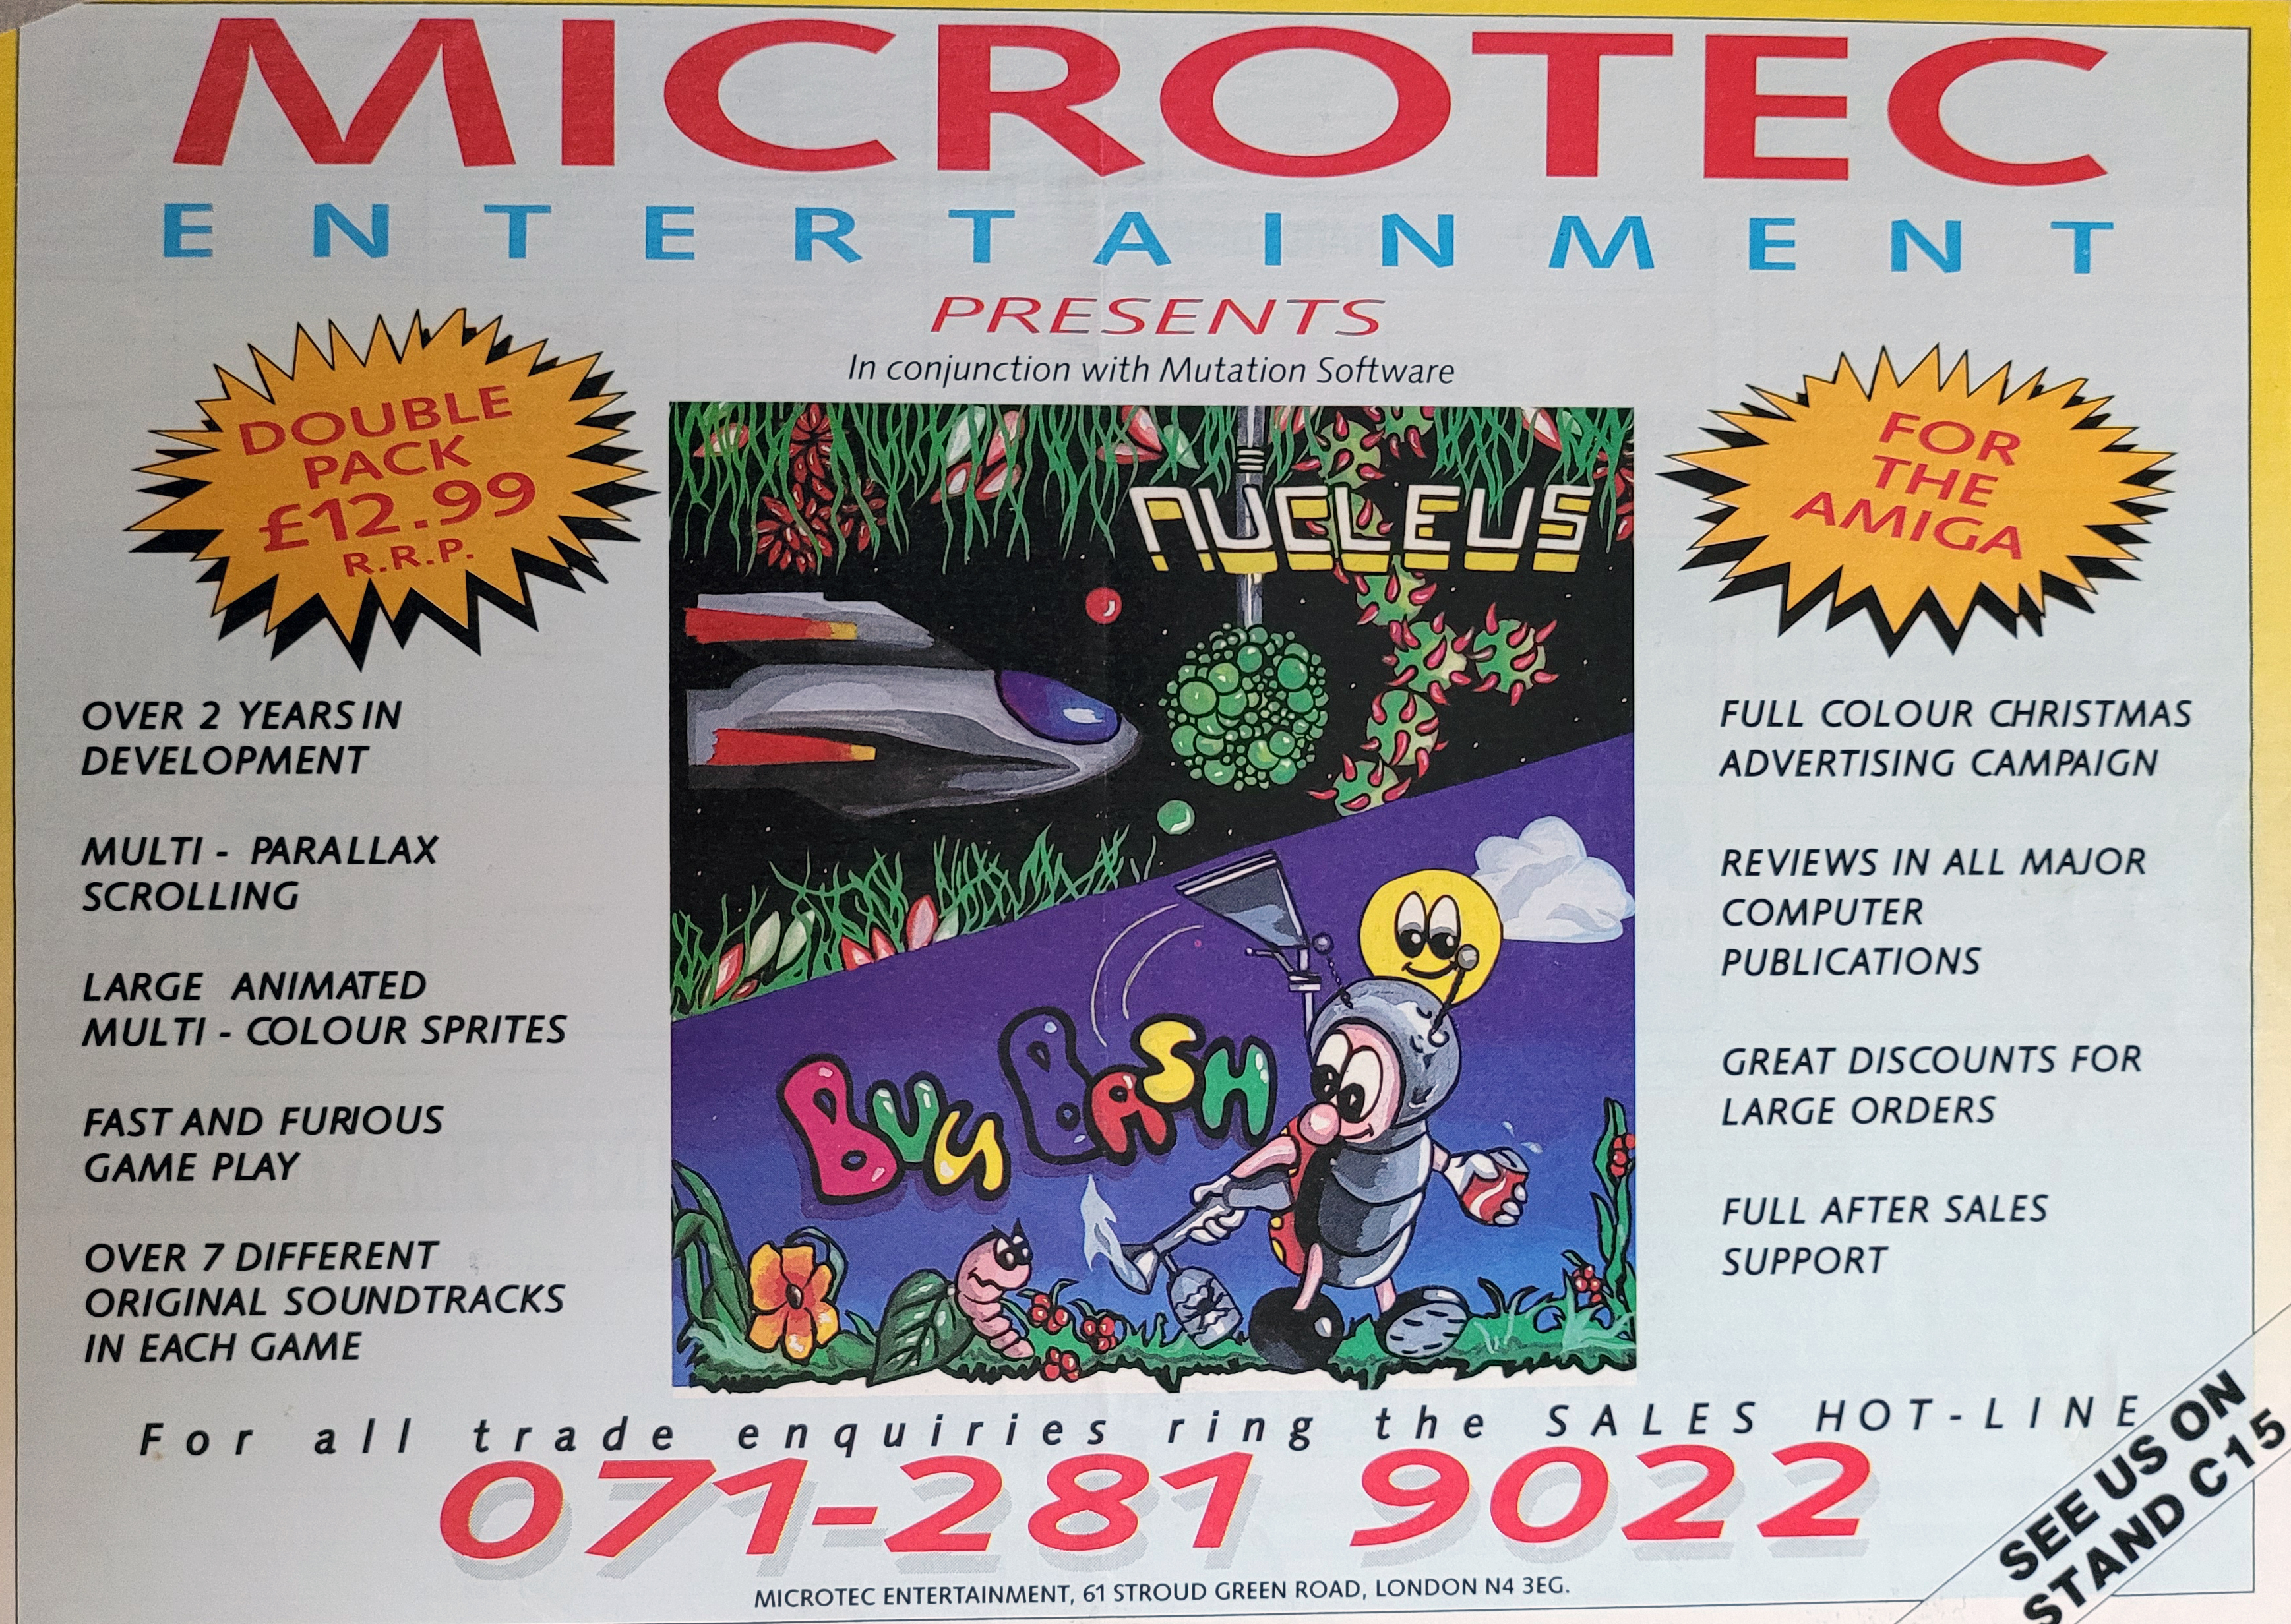 On the Amiga, Bug Bash was released by Microtec as a double pack offering, containing another game made by Adrian. Nucleus was a beautiful side-scrolling shooter.